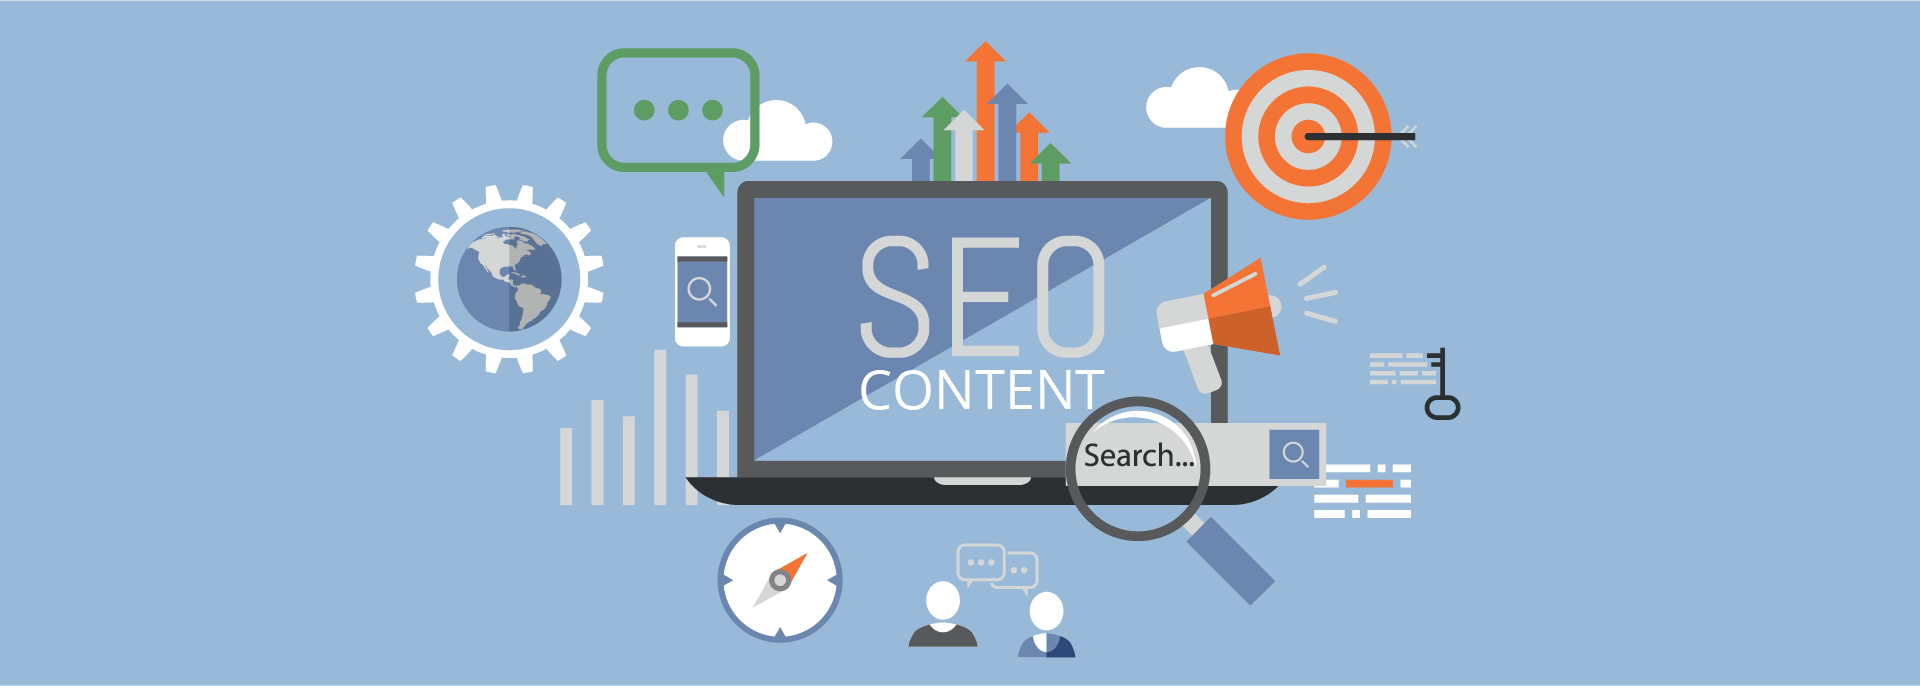 Content Strategy and SEO Best Practices in Website Planning
